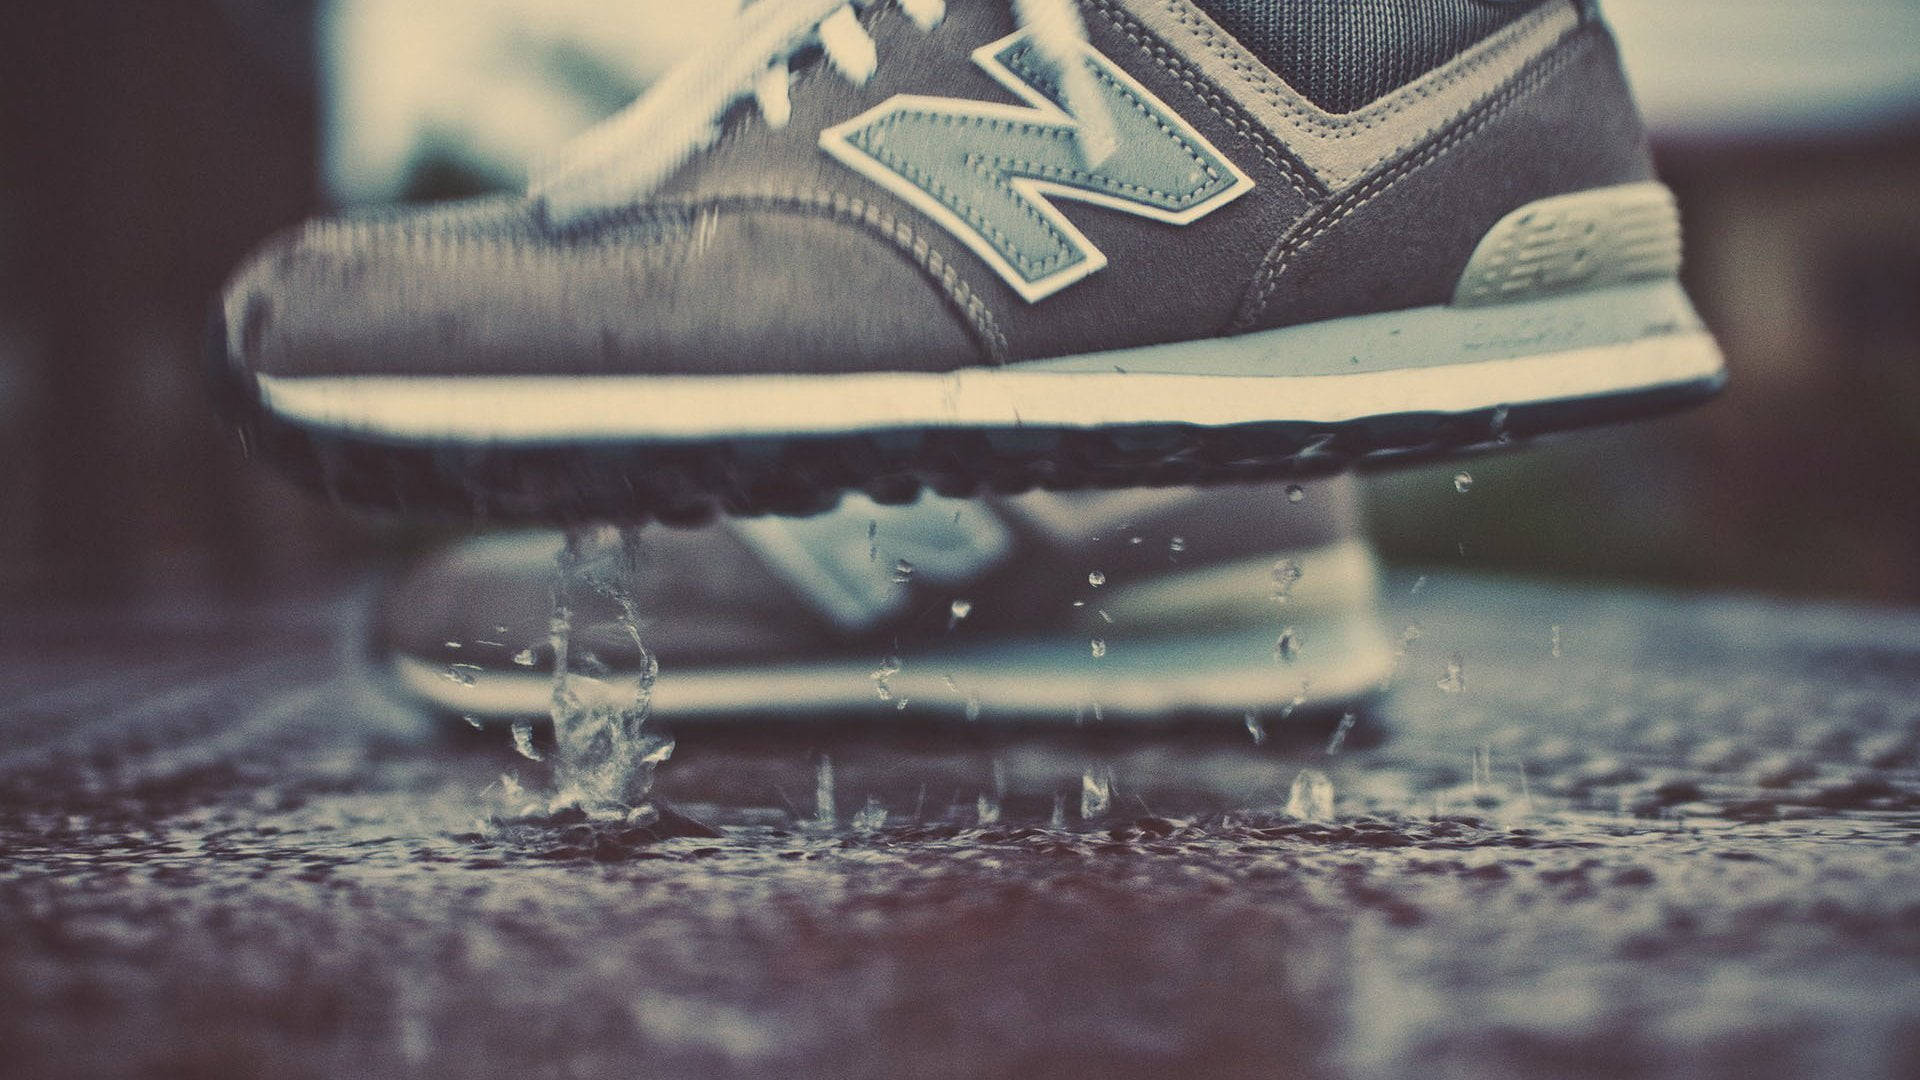 New Balance On Puddle Of Water